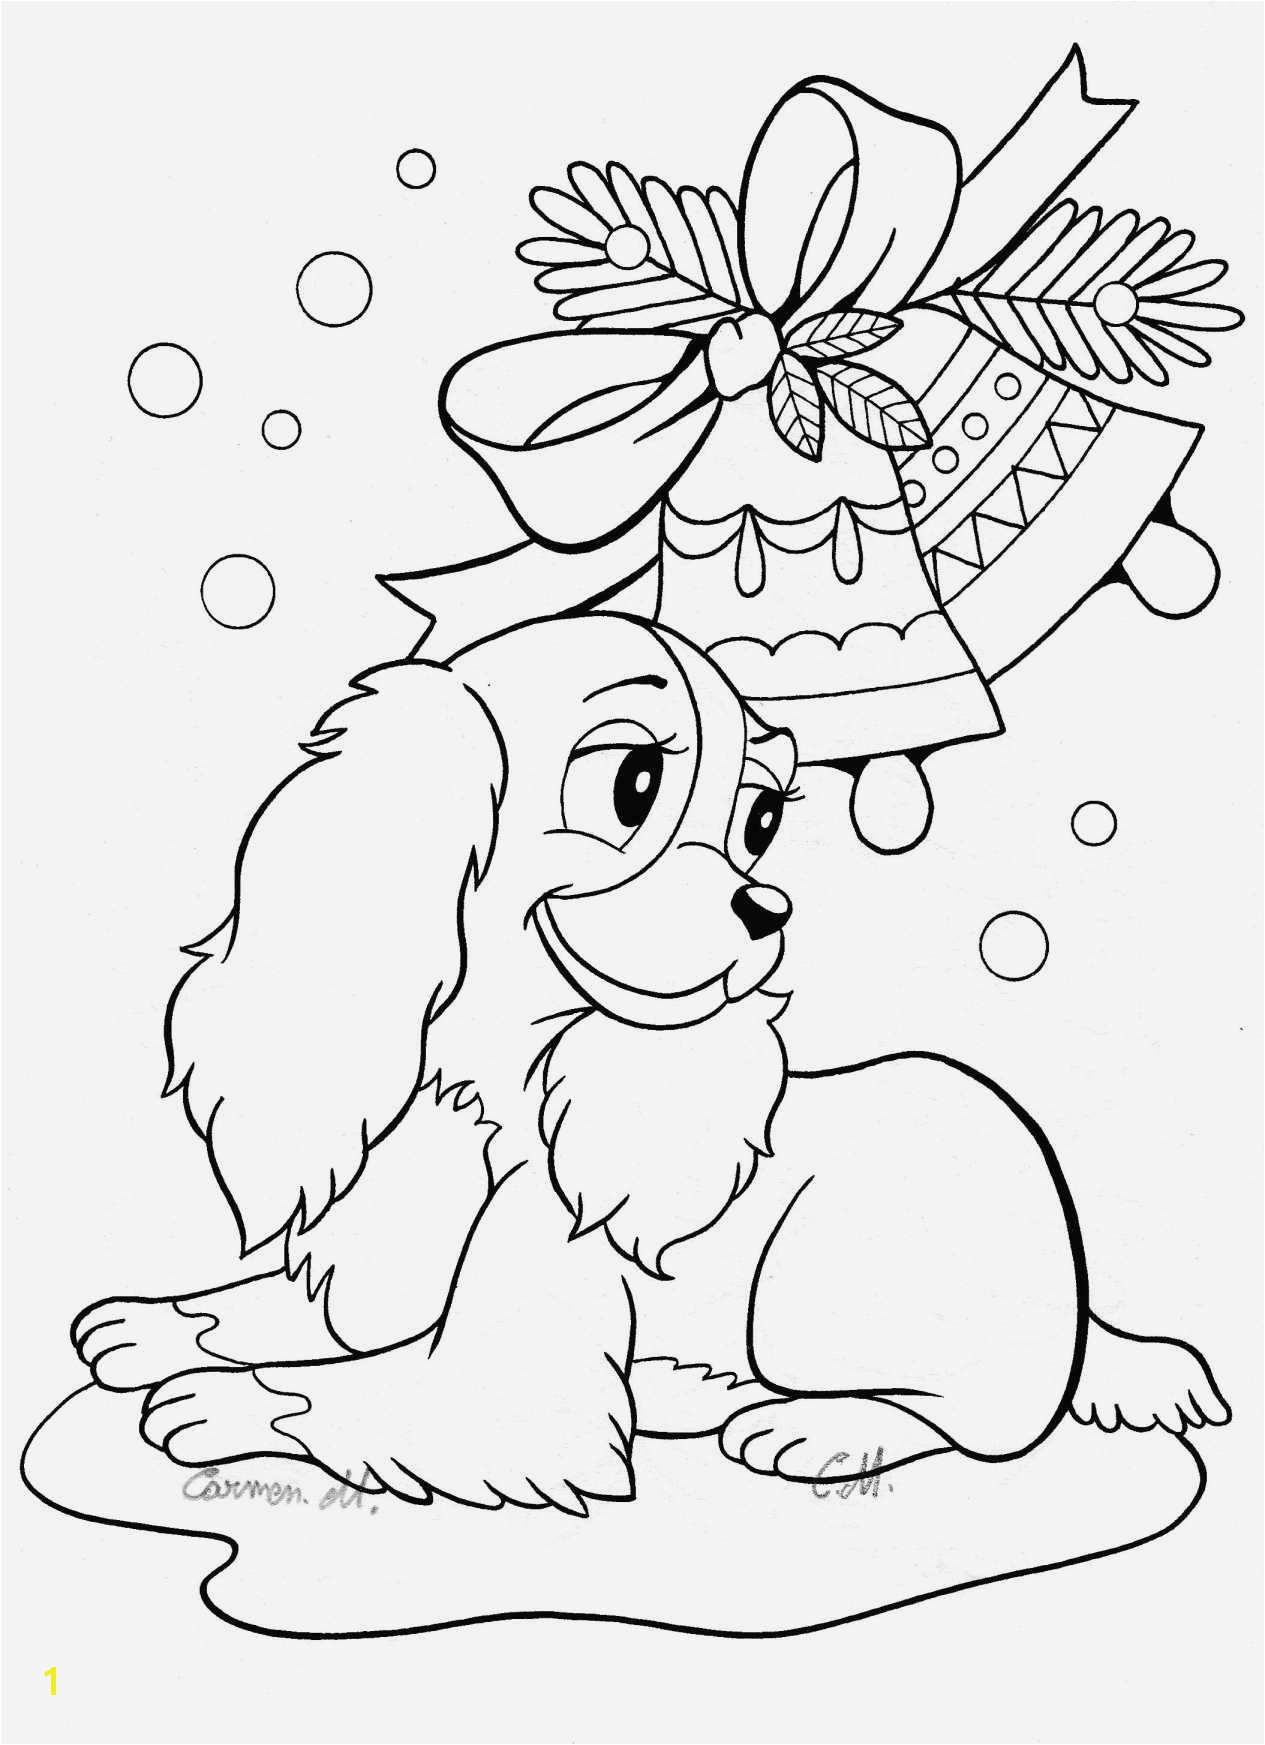 coloring pages of cute puppies and kittens Free Printable Christmas Color Pages Christmas Coloring Pages